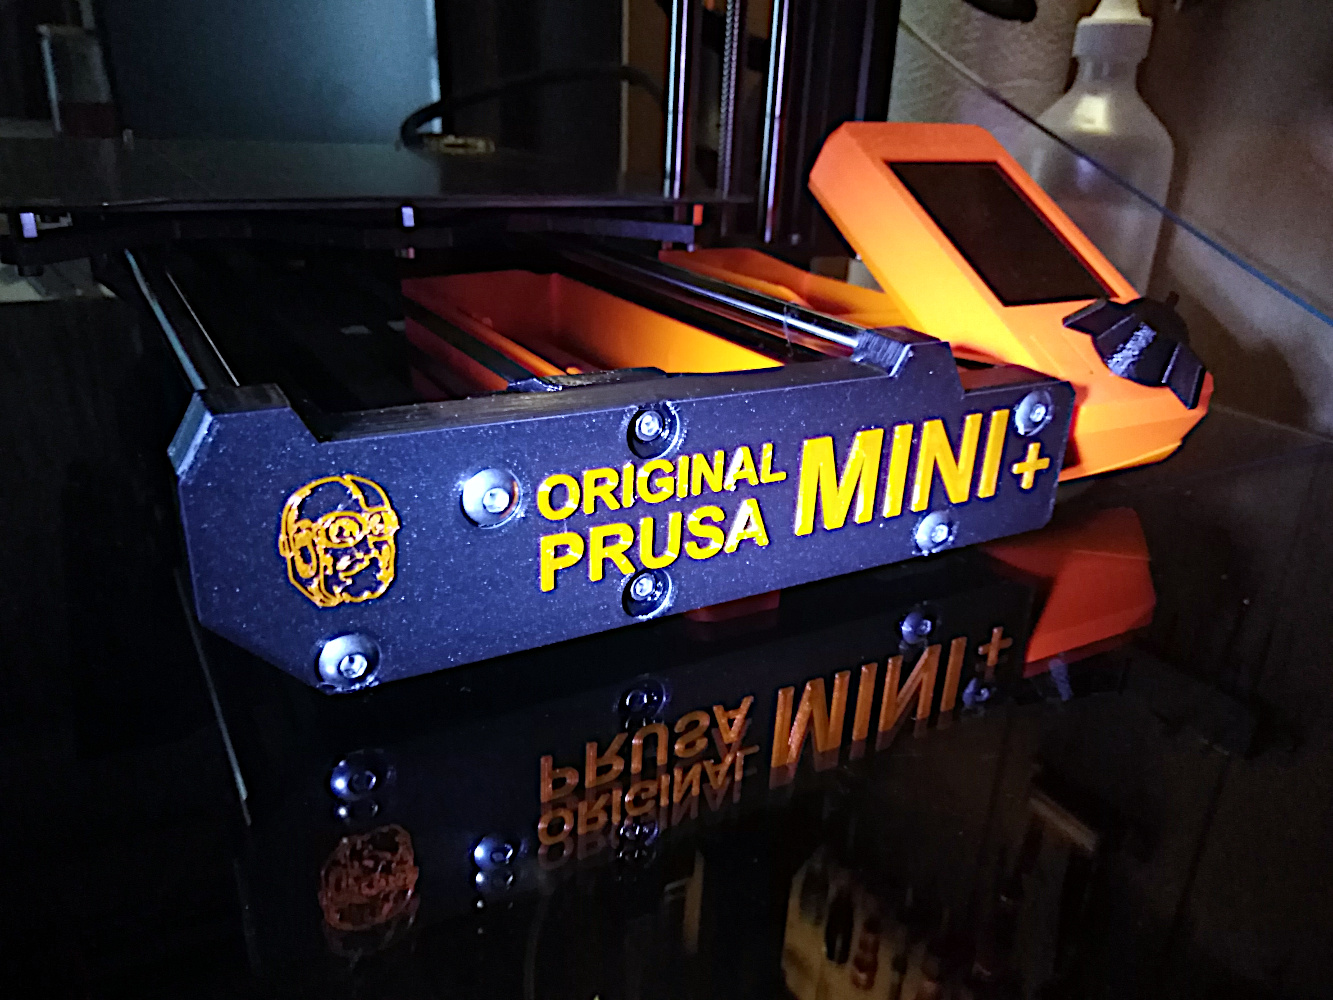 Prusa MINI Front Plate Cover - no disassembly